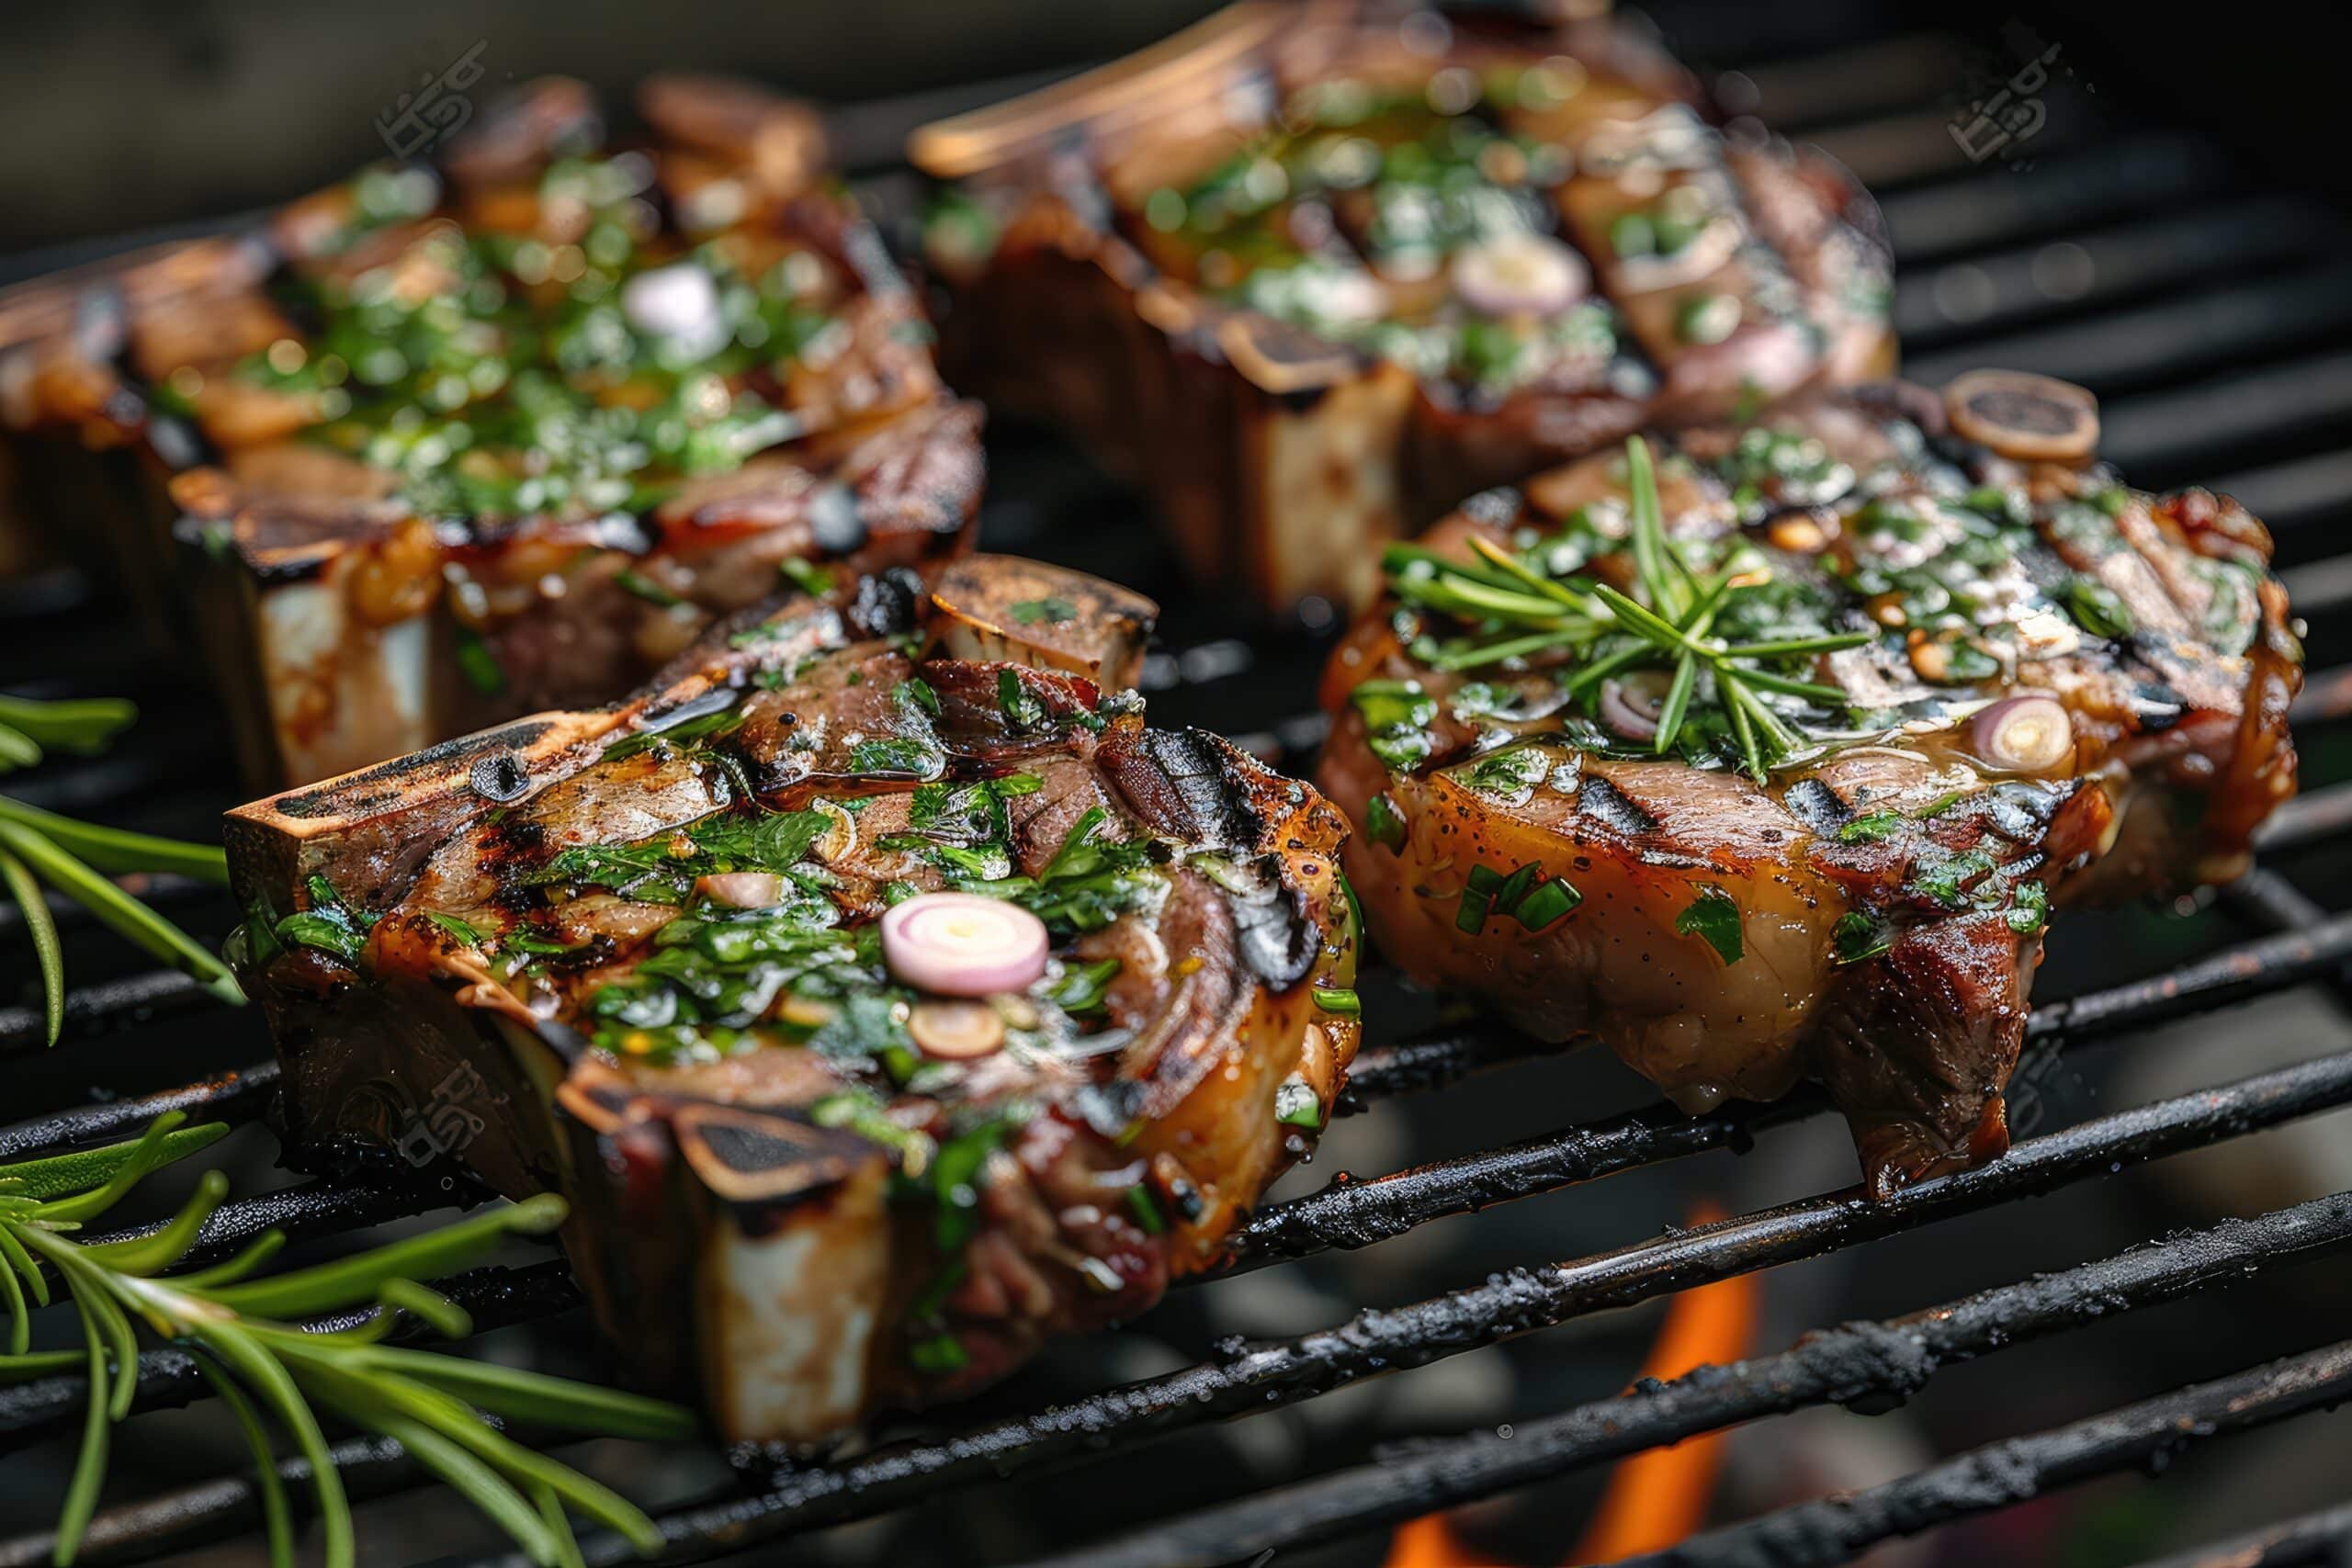 www.appr.com : How To Grill Pork Chops On A Gas Grill?